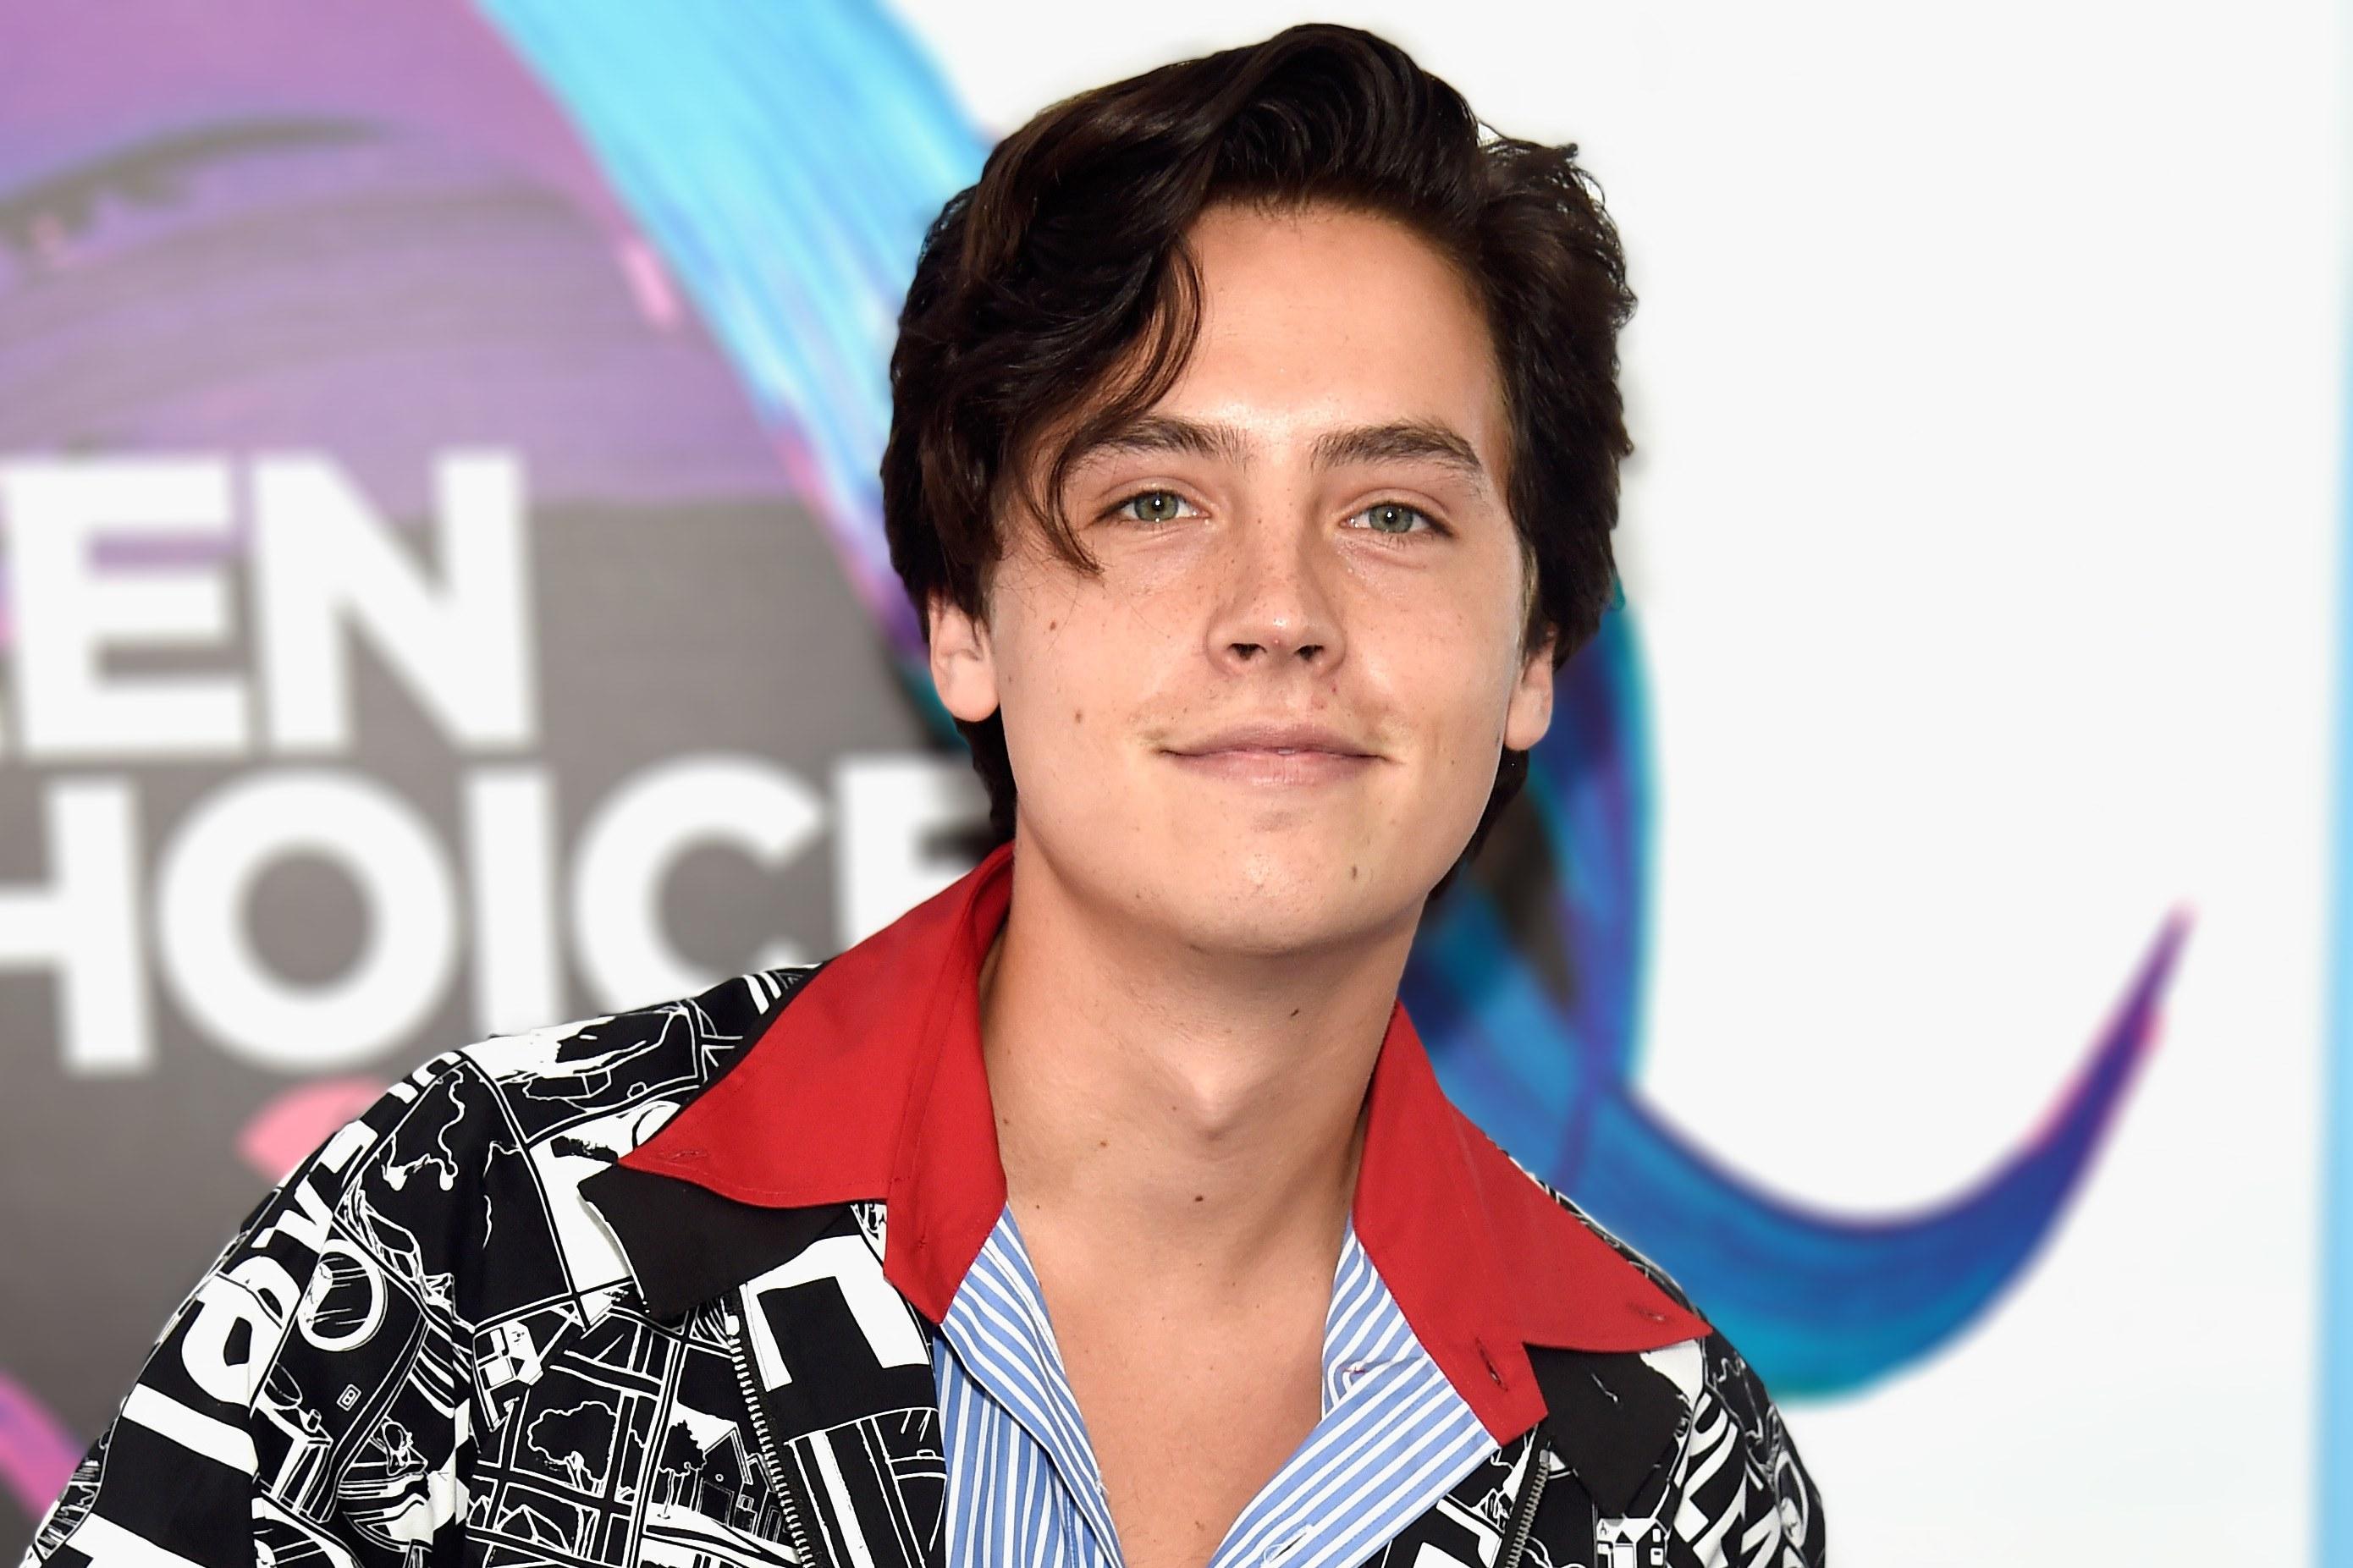 Cole Sprouse Will Star in New Movie “Five Feet Apart”